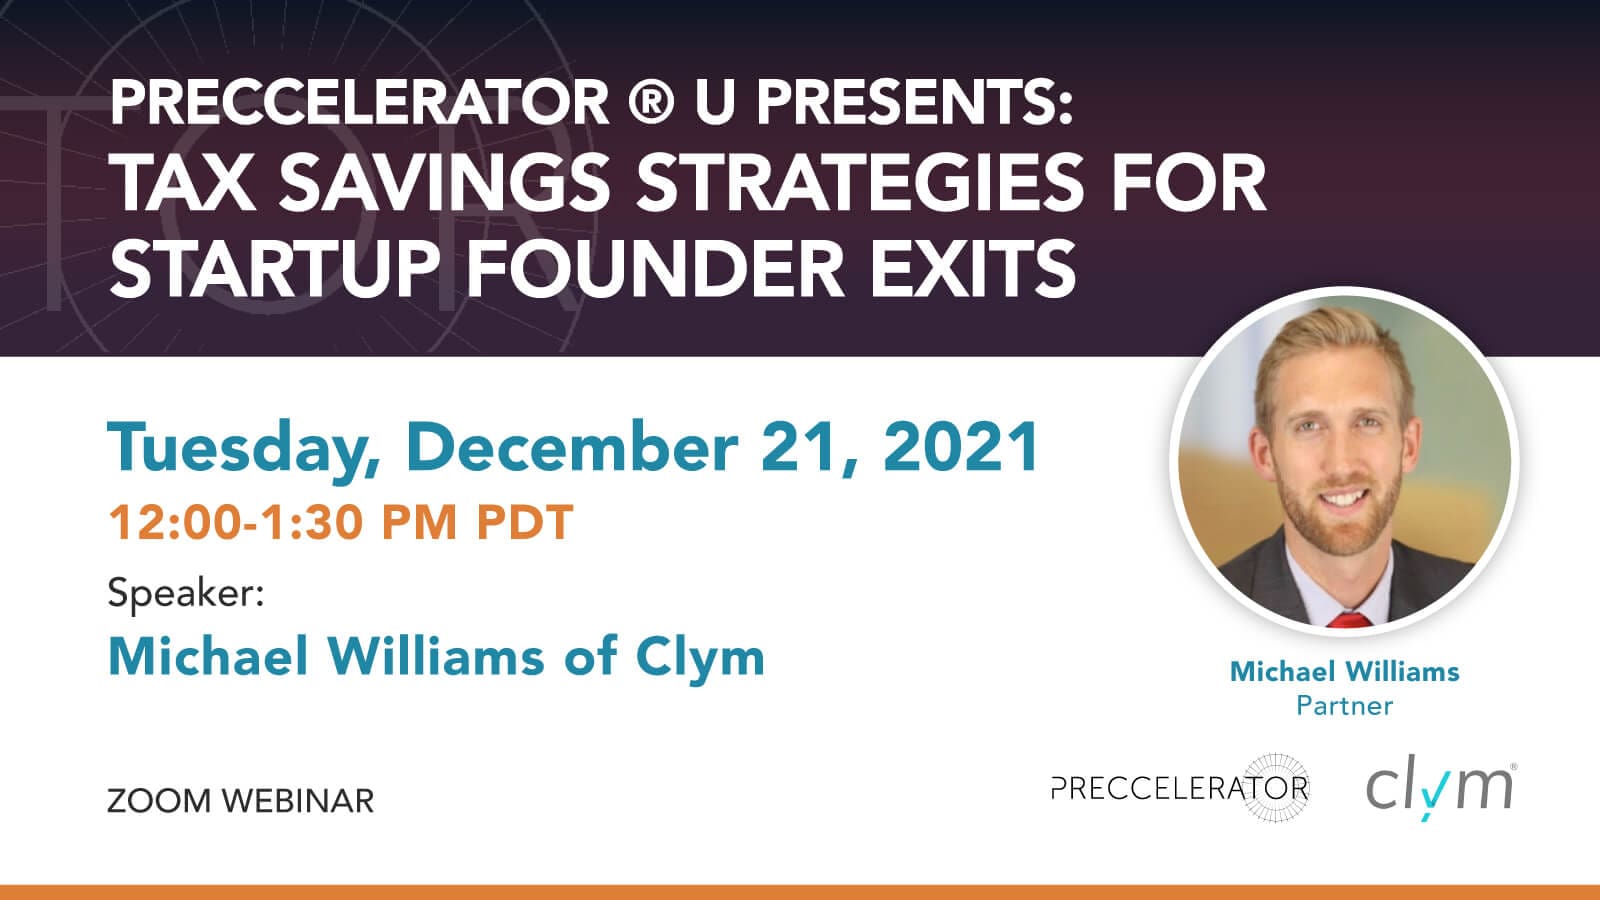 Join Preccelerator® U for our next workshop: Tax Savings Strategies for Startup Founder Exits